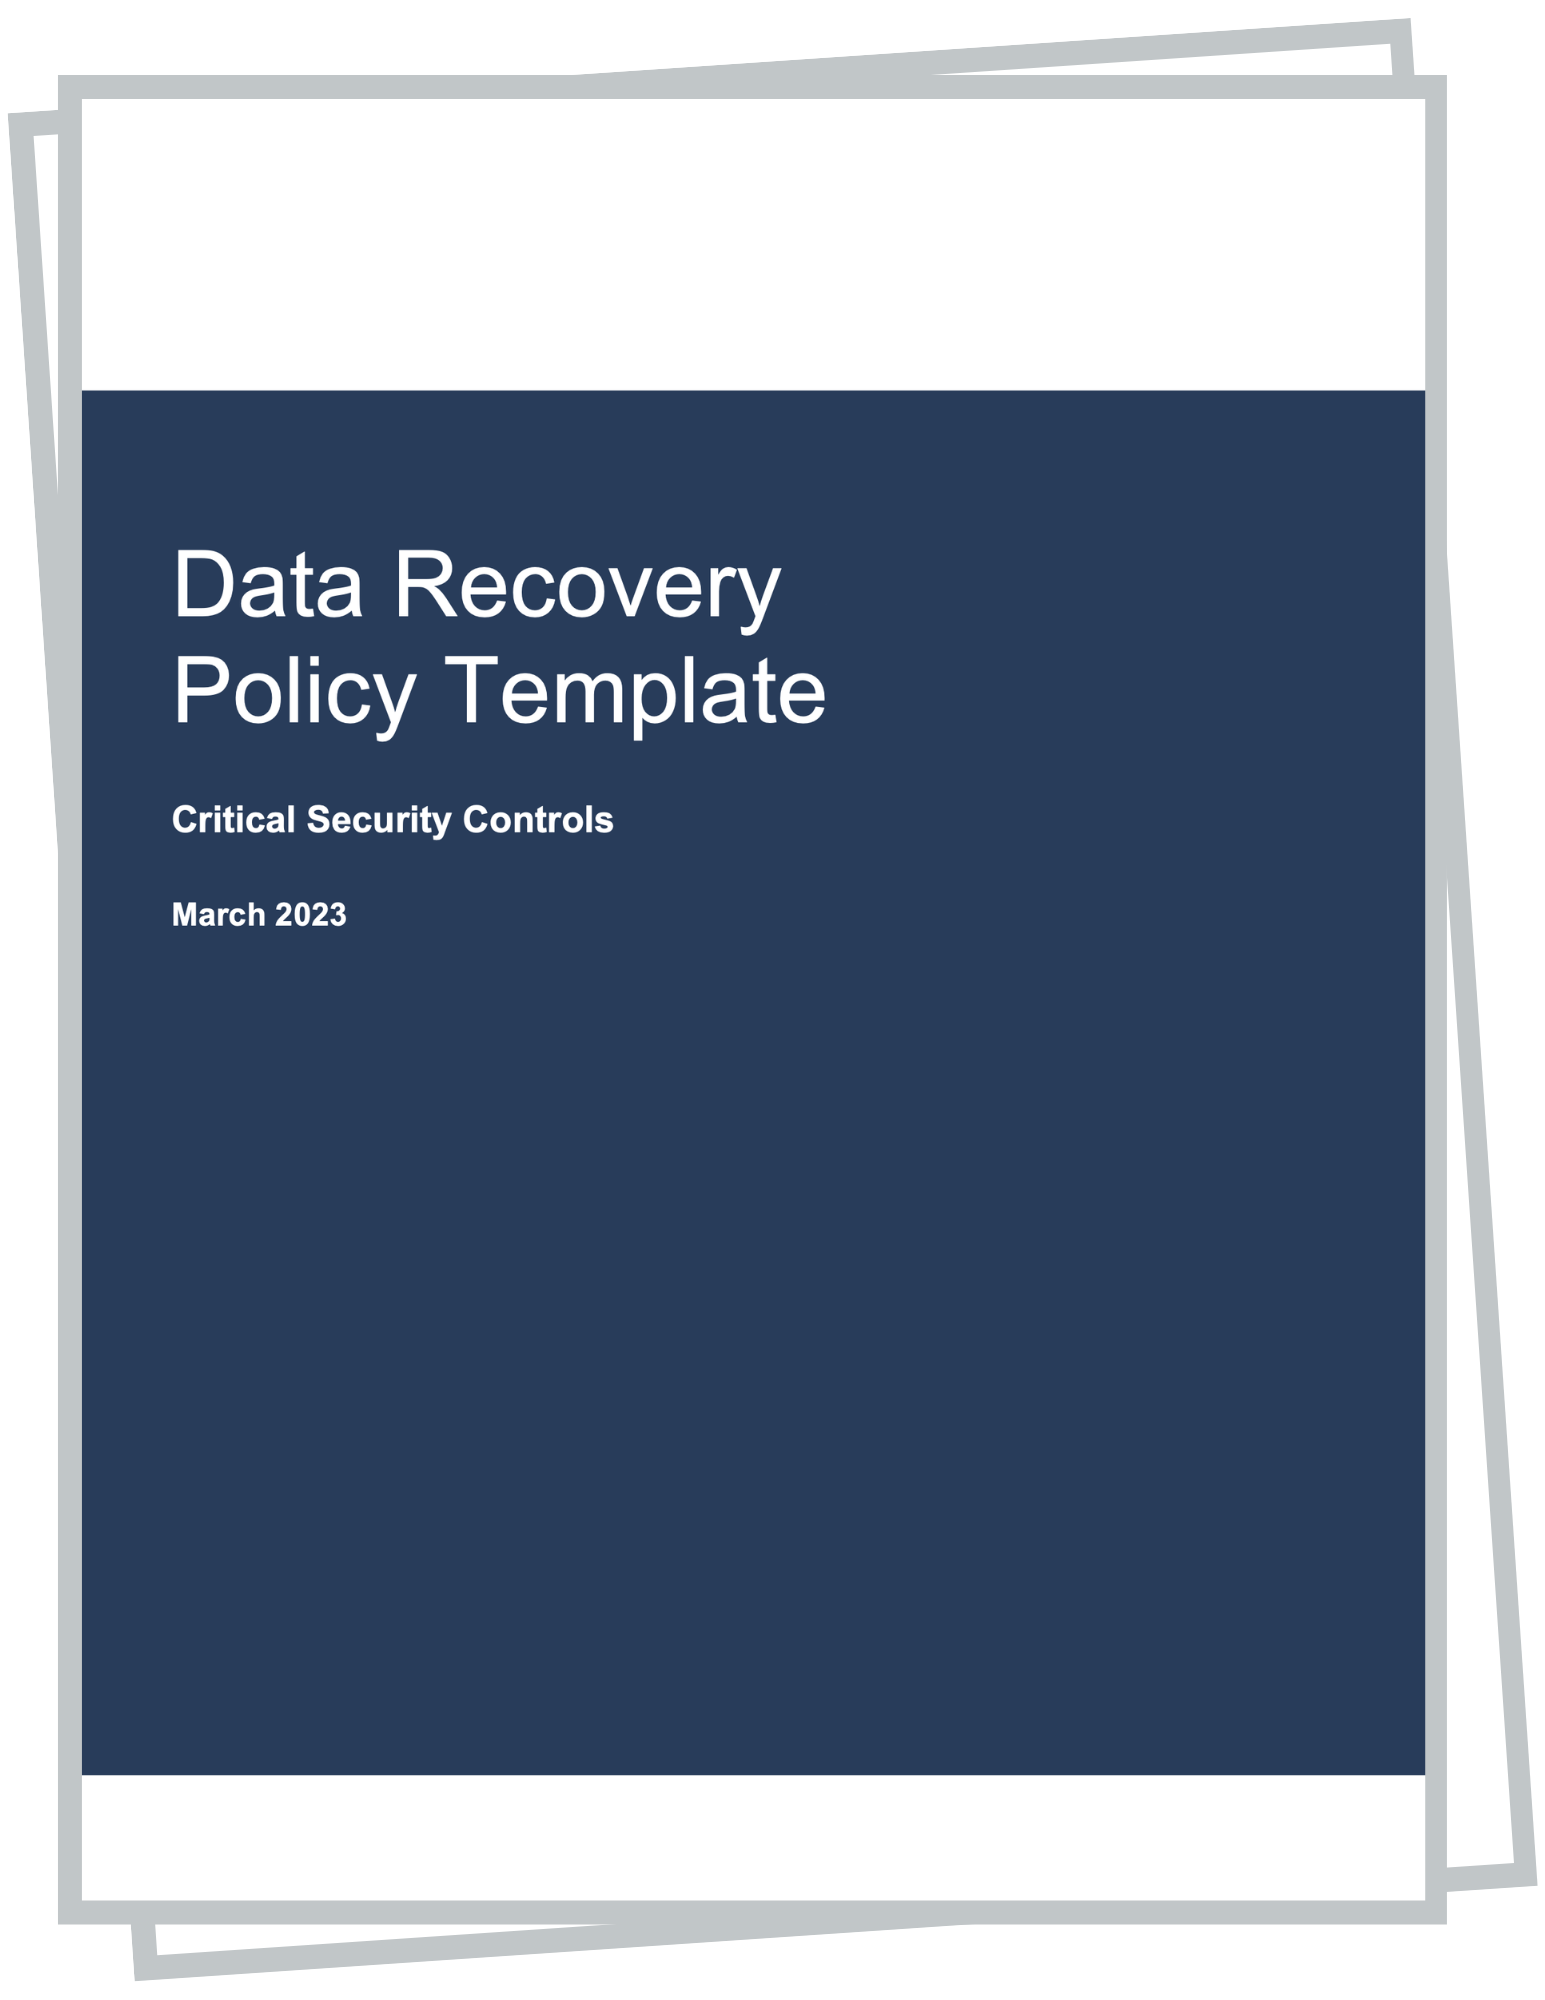 Data Recovery Policy Template for CIS Control 11